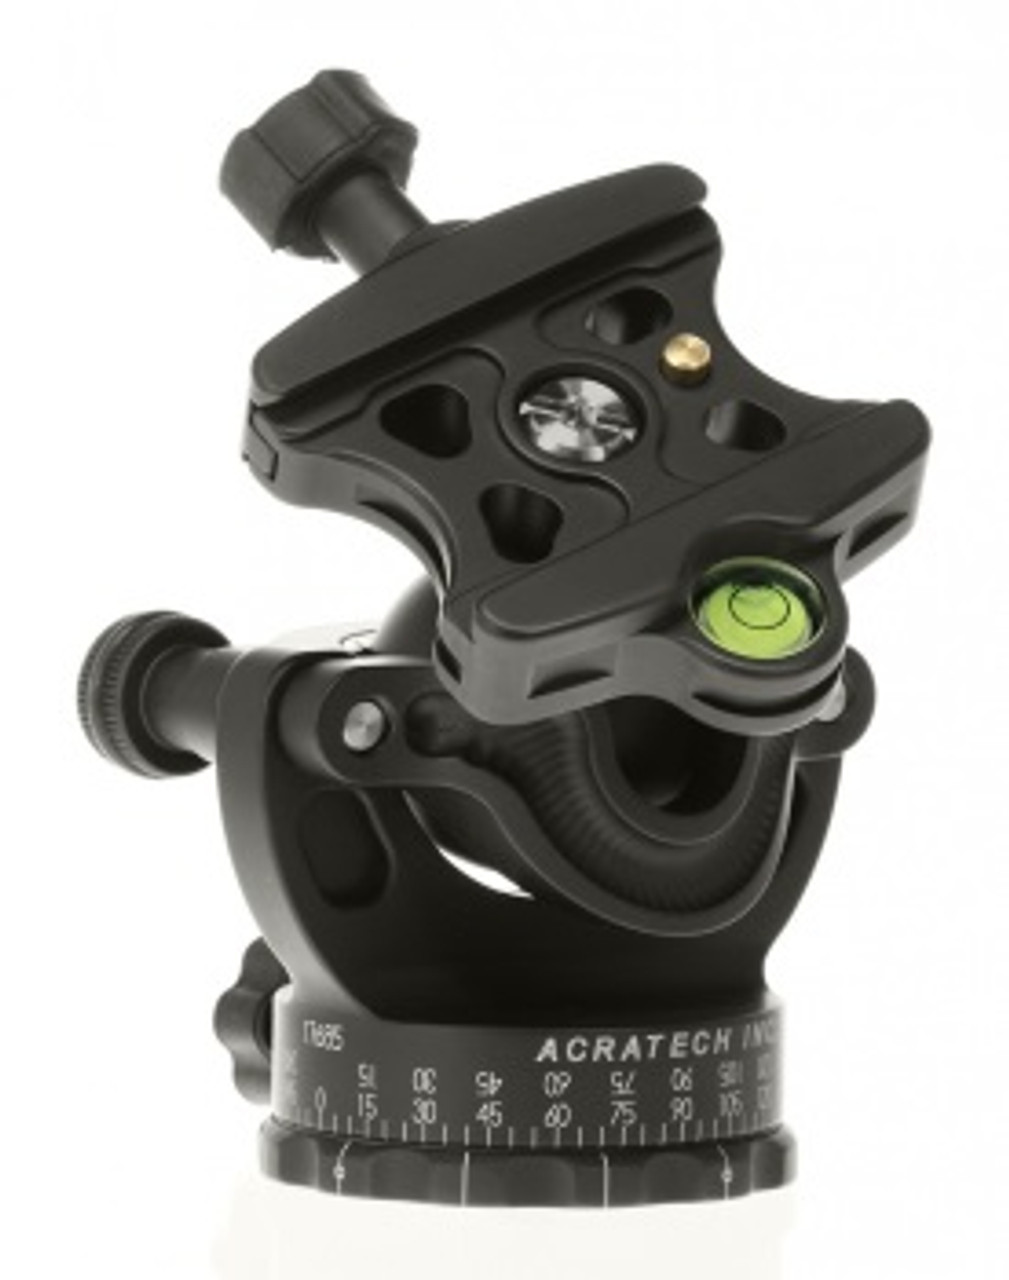 GP Ball-Head by Acratech with Gimbal and Pan feature